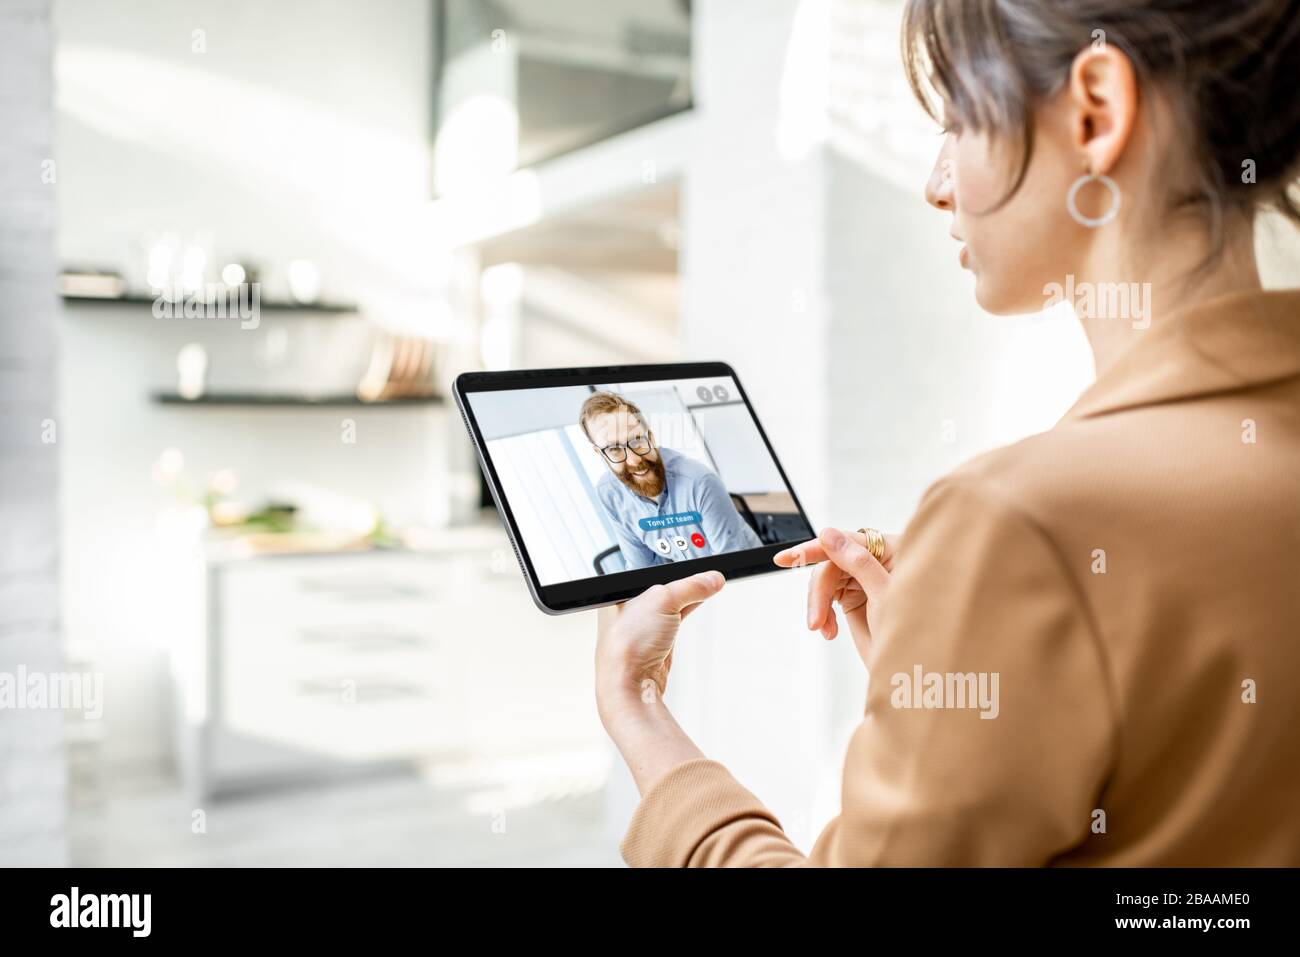 Business woman having a video call with coworker using a digital tablet, while working from home Stock Photo